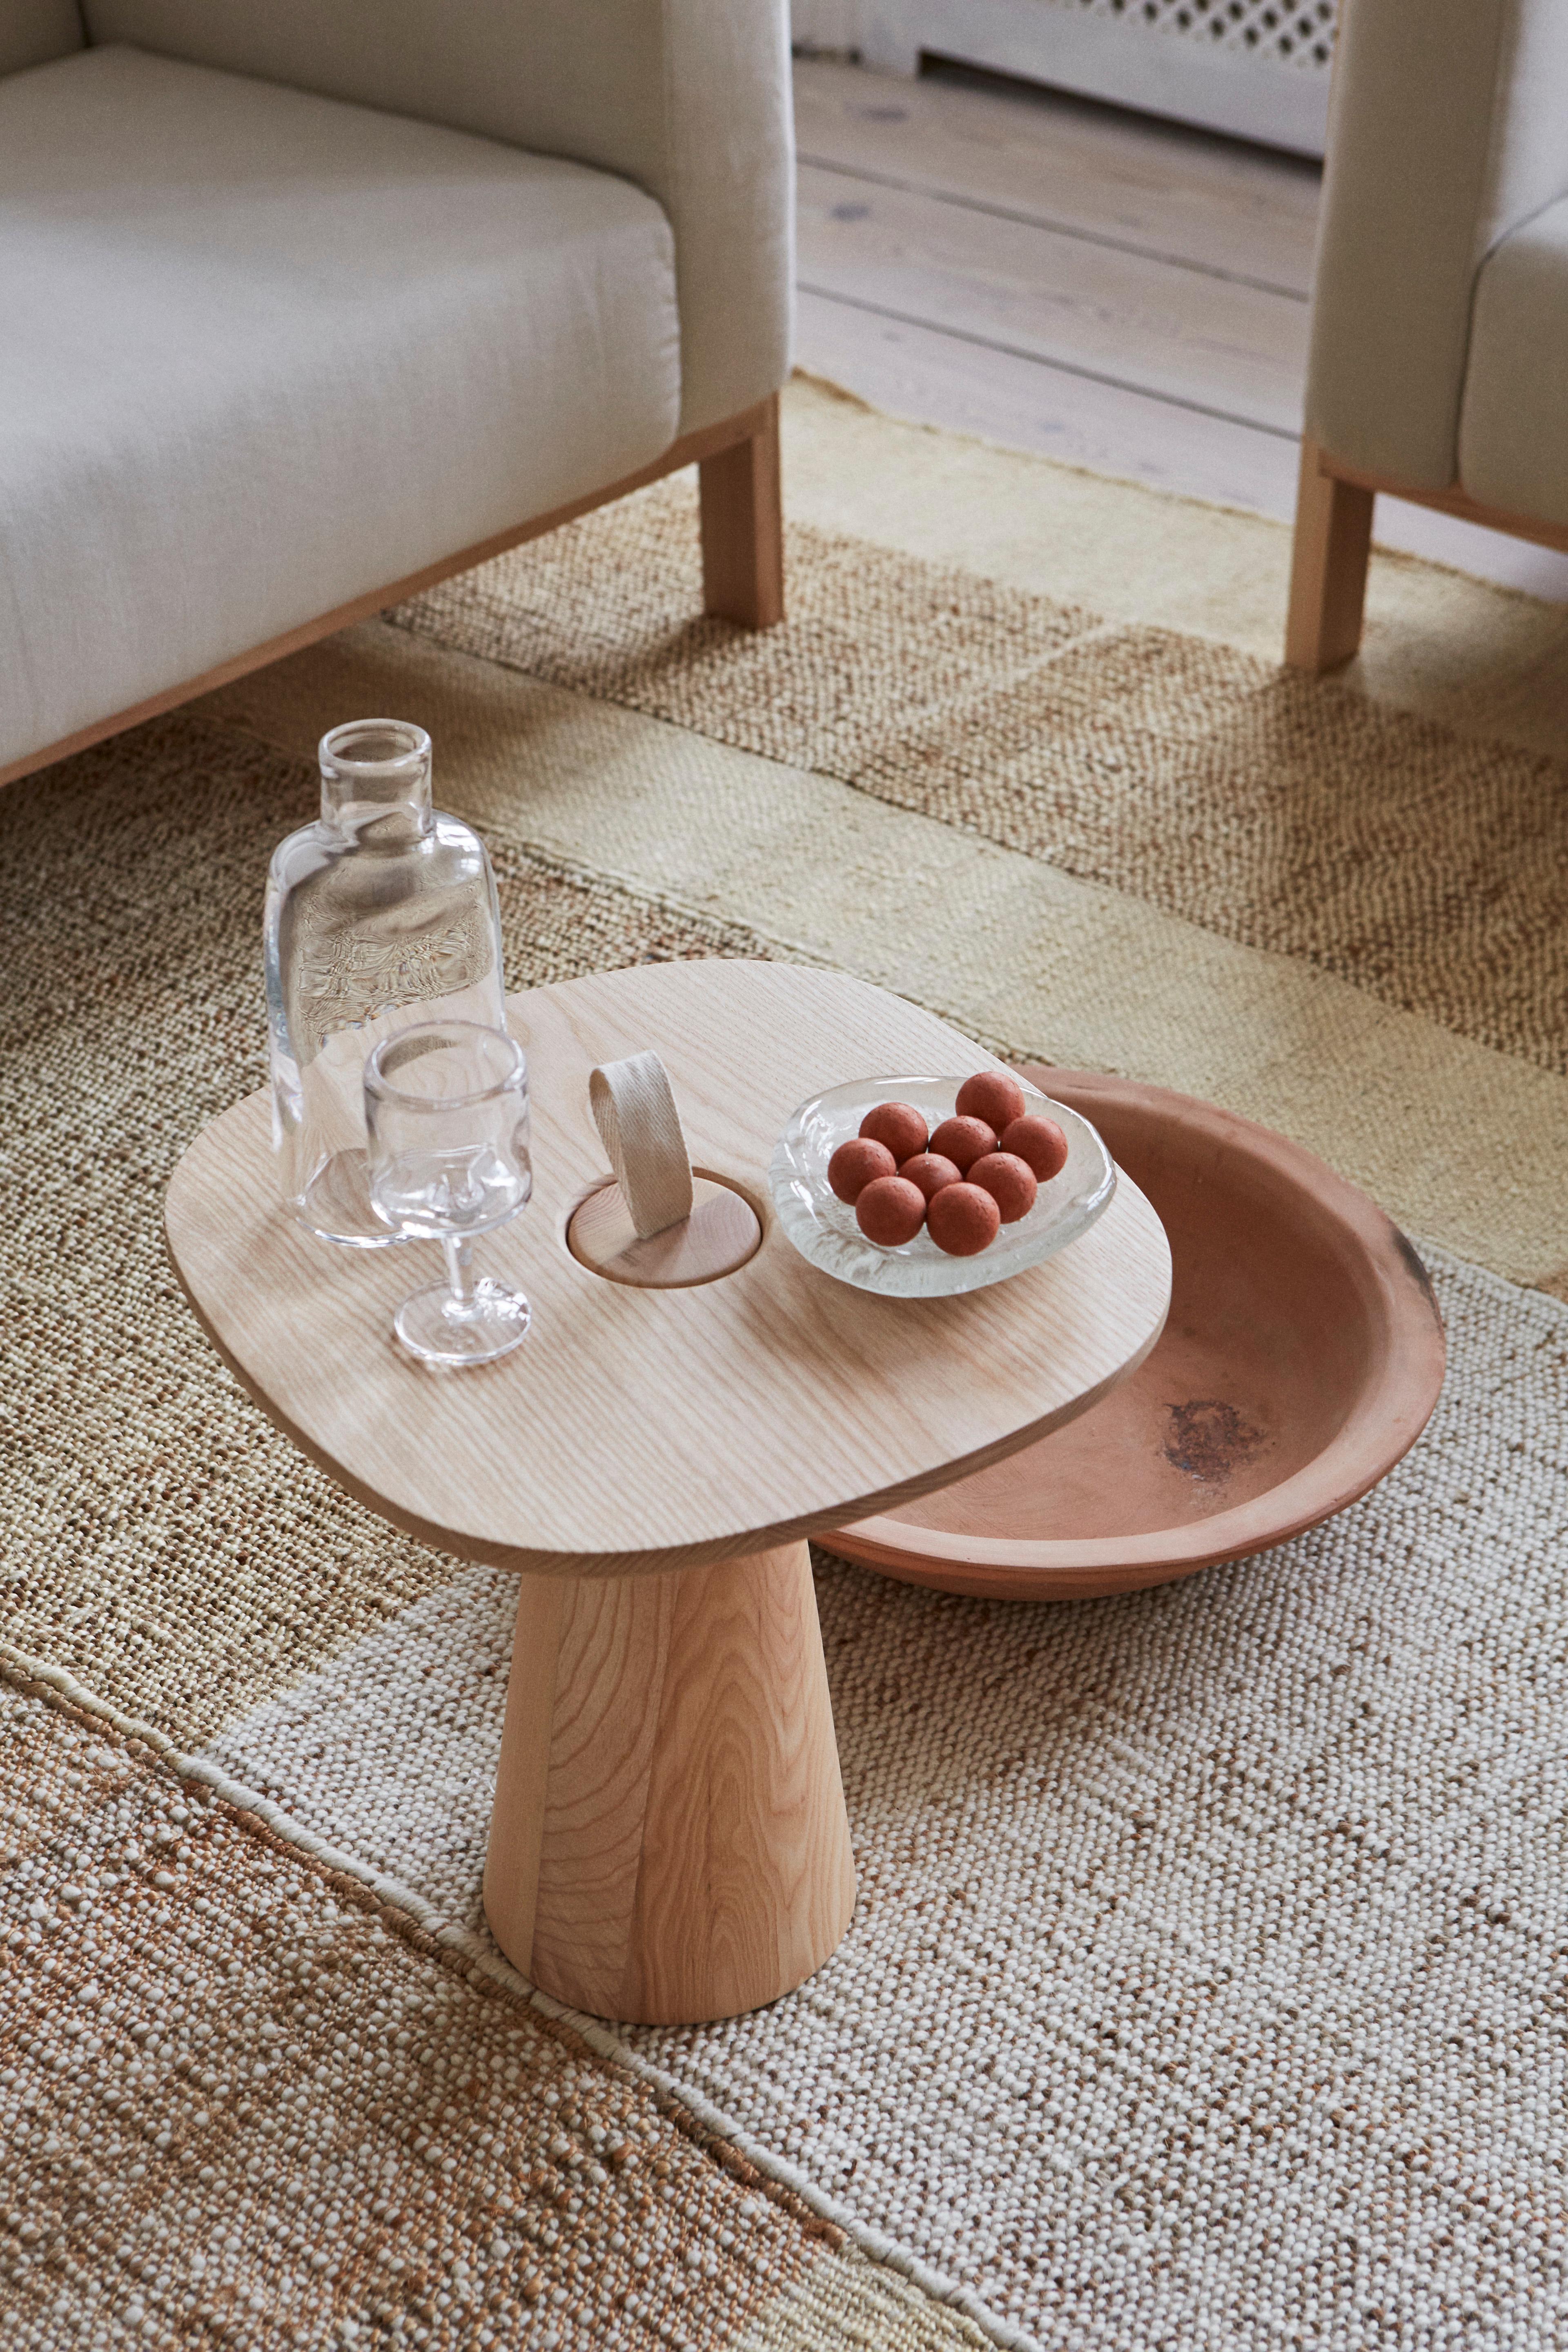 Minimal in its components, MIGO table consists of two parts: a table top, and a conical shaped base, whose top ends with a strap for it to be lifted by.

The soft and friendly shape of the top makes the table suitable for different situations, and